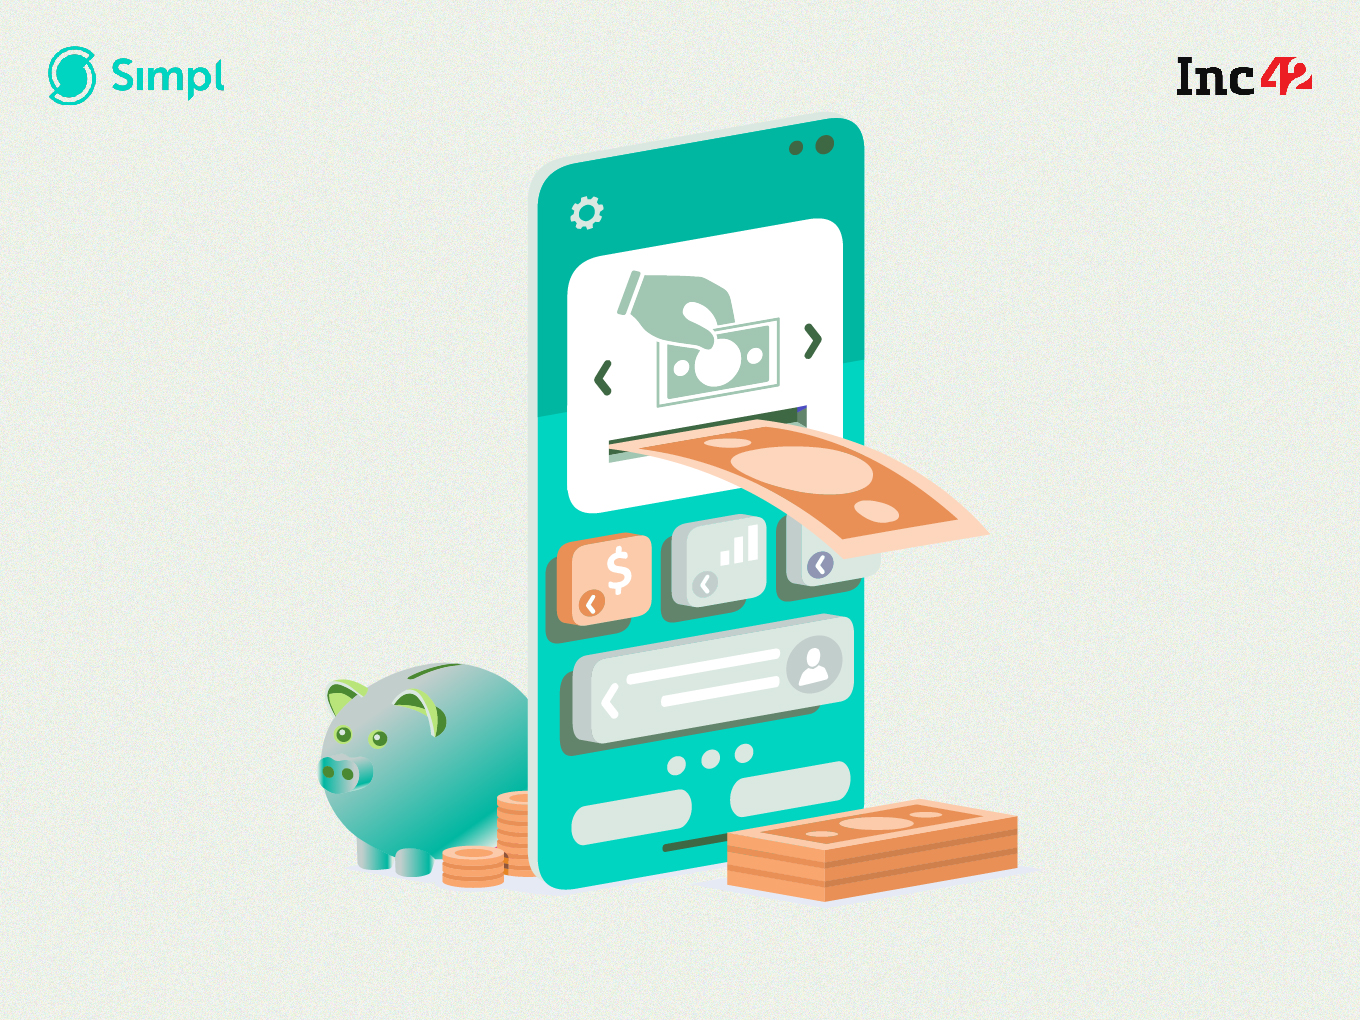 Exclusive: BNPL Startup Simpl To Raise $40 Mn In Series B Round From Valar & IA Ventures